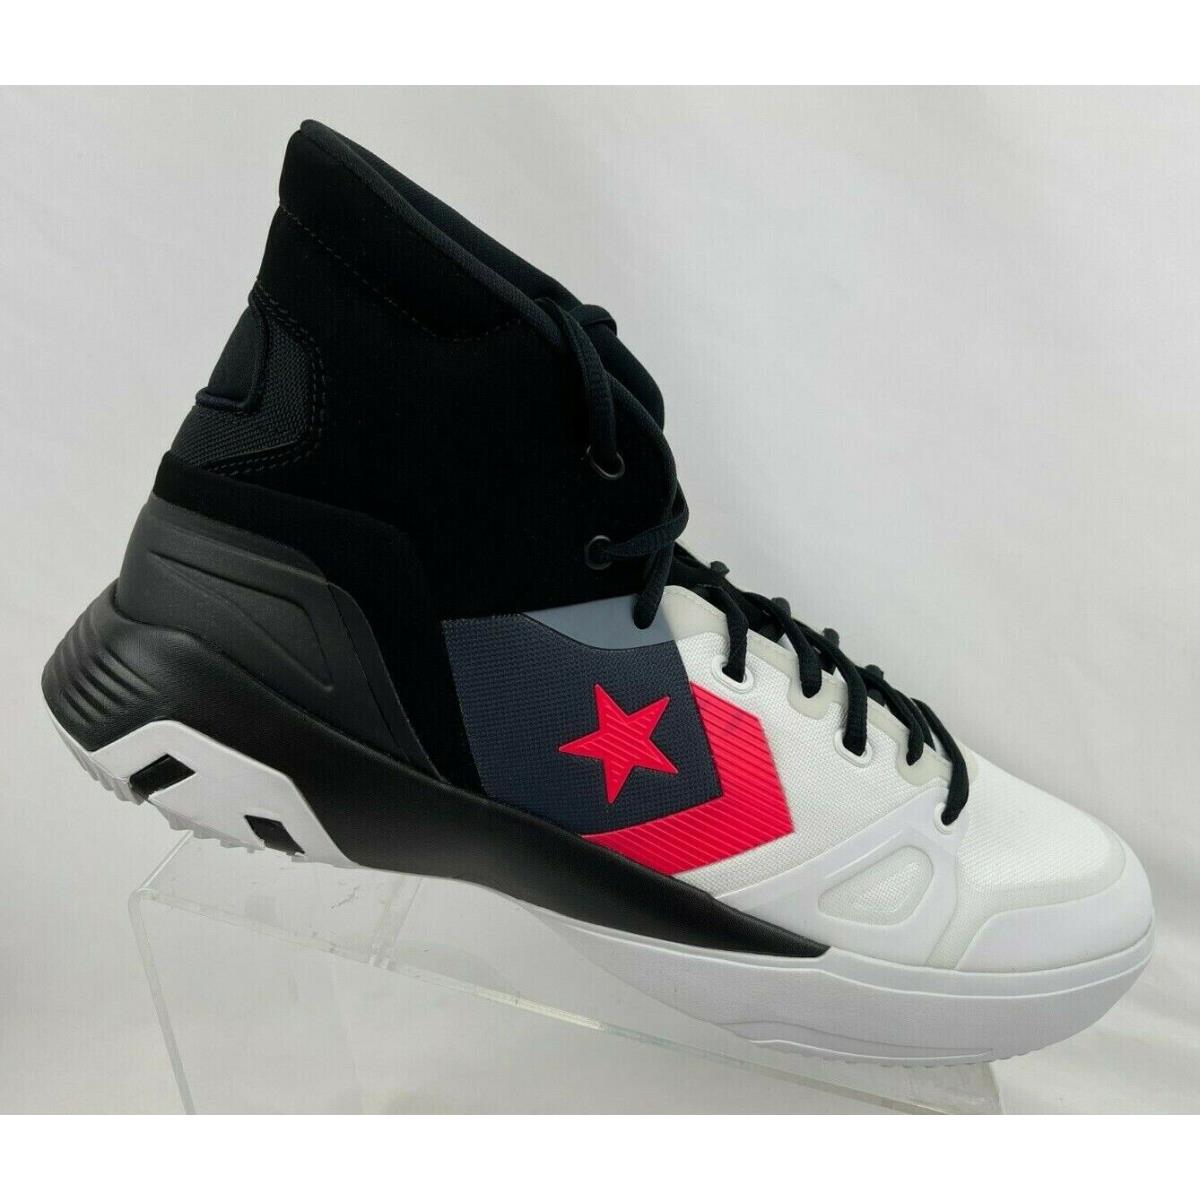 Converse G4 High Top React Basketball Boots Sneakers Shoes 166804c Mens Sz 10